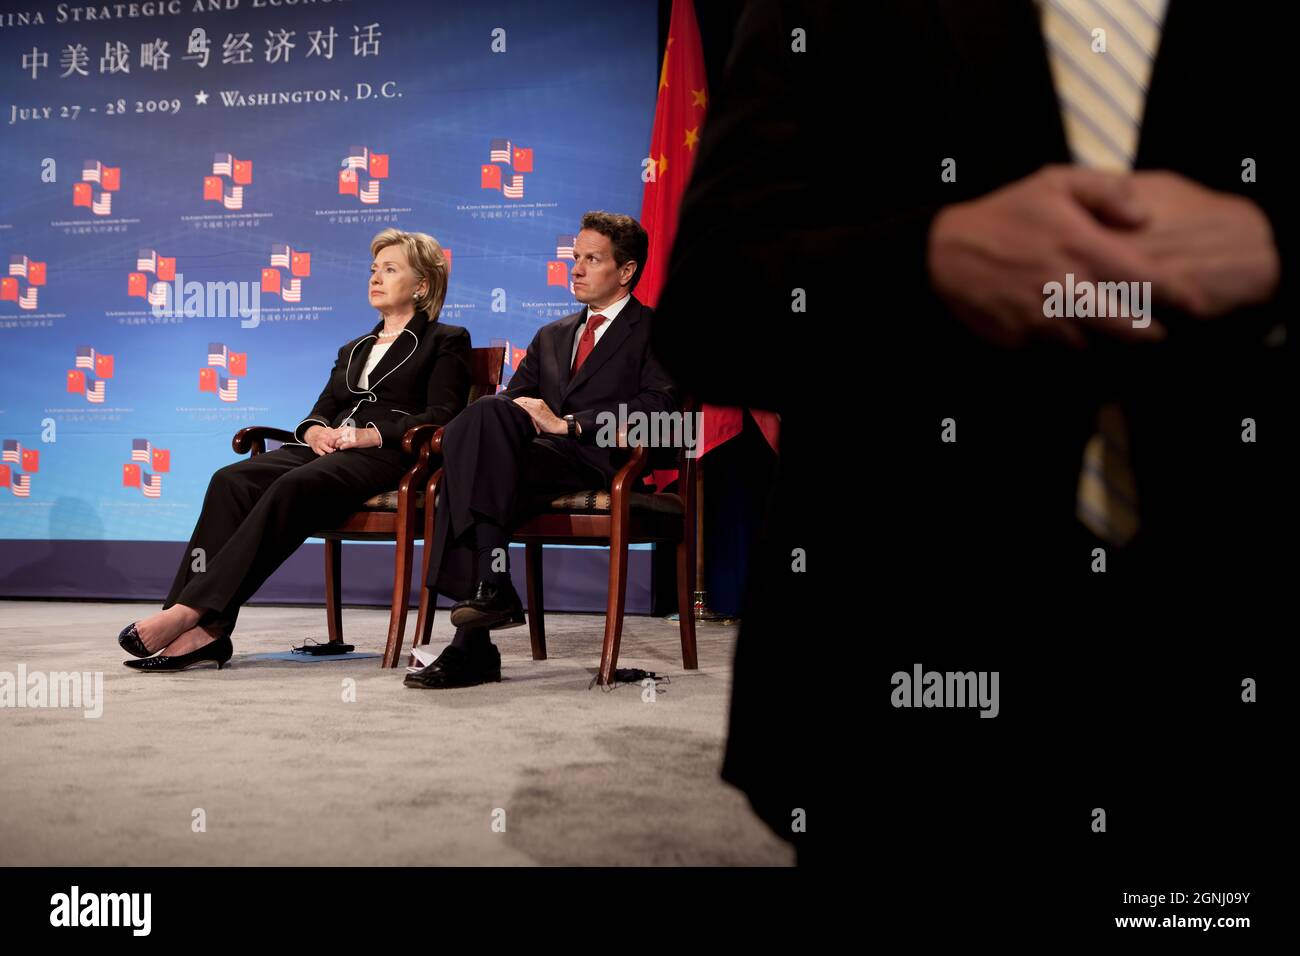 Secretary of State Hillary Clinton and Treasury Secretary Timothy Geithner look on as President Barack Obama addresses the opening session of the first U.S.-China Strategic and Economic Dialogue at the Ronald Reagan Building and International Trade Center in Washington on Monday, July 27, 2009.   (Official White House Photo by Pete Souza)  This official White House photograph is being made available for publication by news organizations and/or for personal use printing by the subject(s) of the photograph. The photograph may not be manipulated in any way or used in materials, advertisements, pr Stock Photo